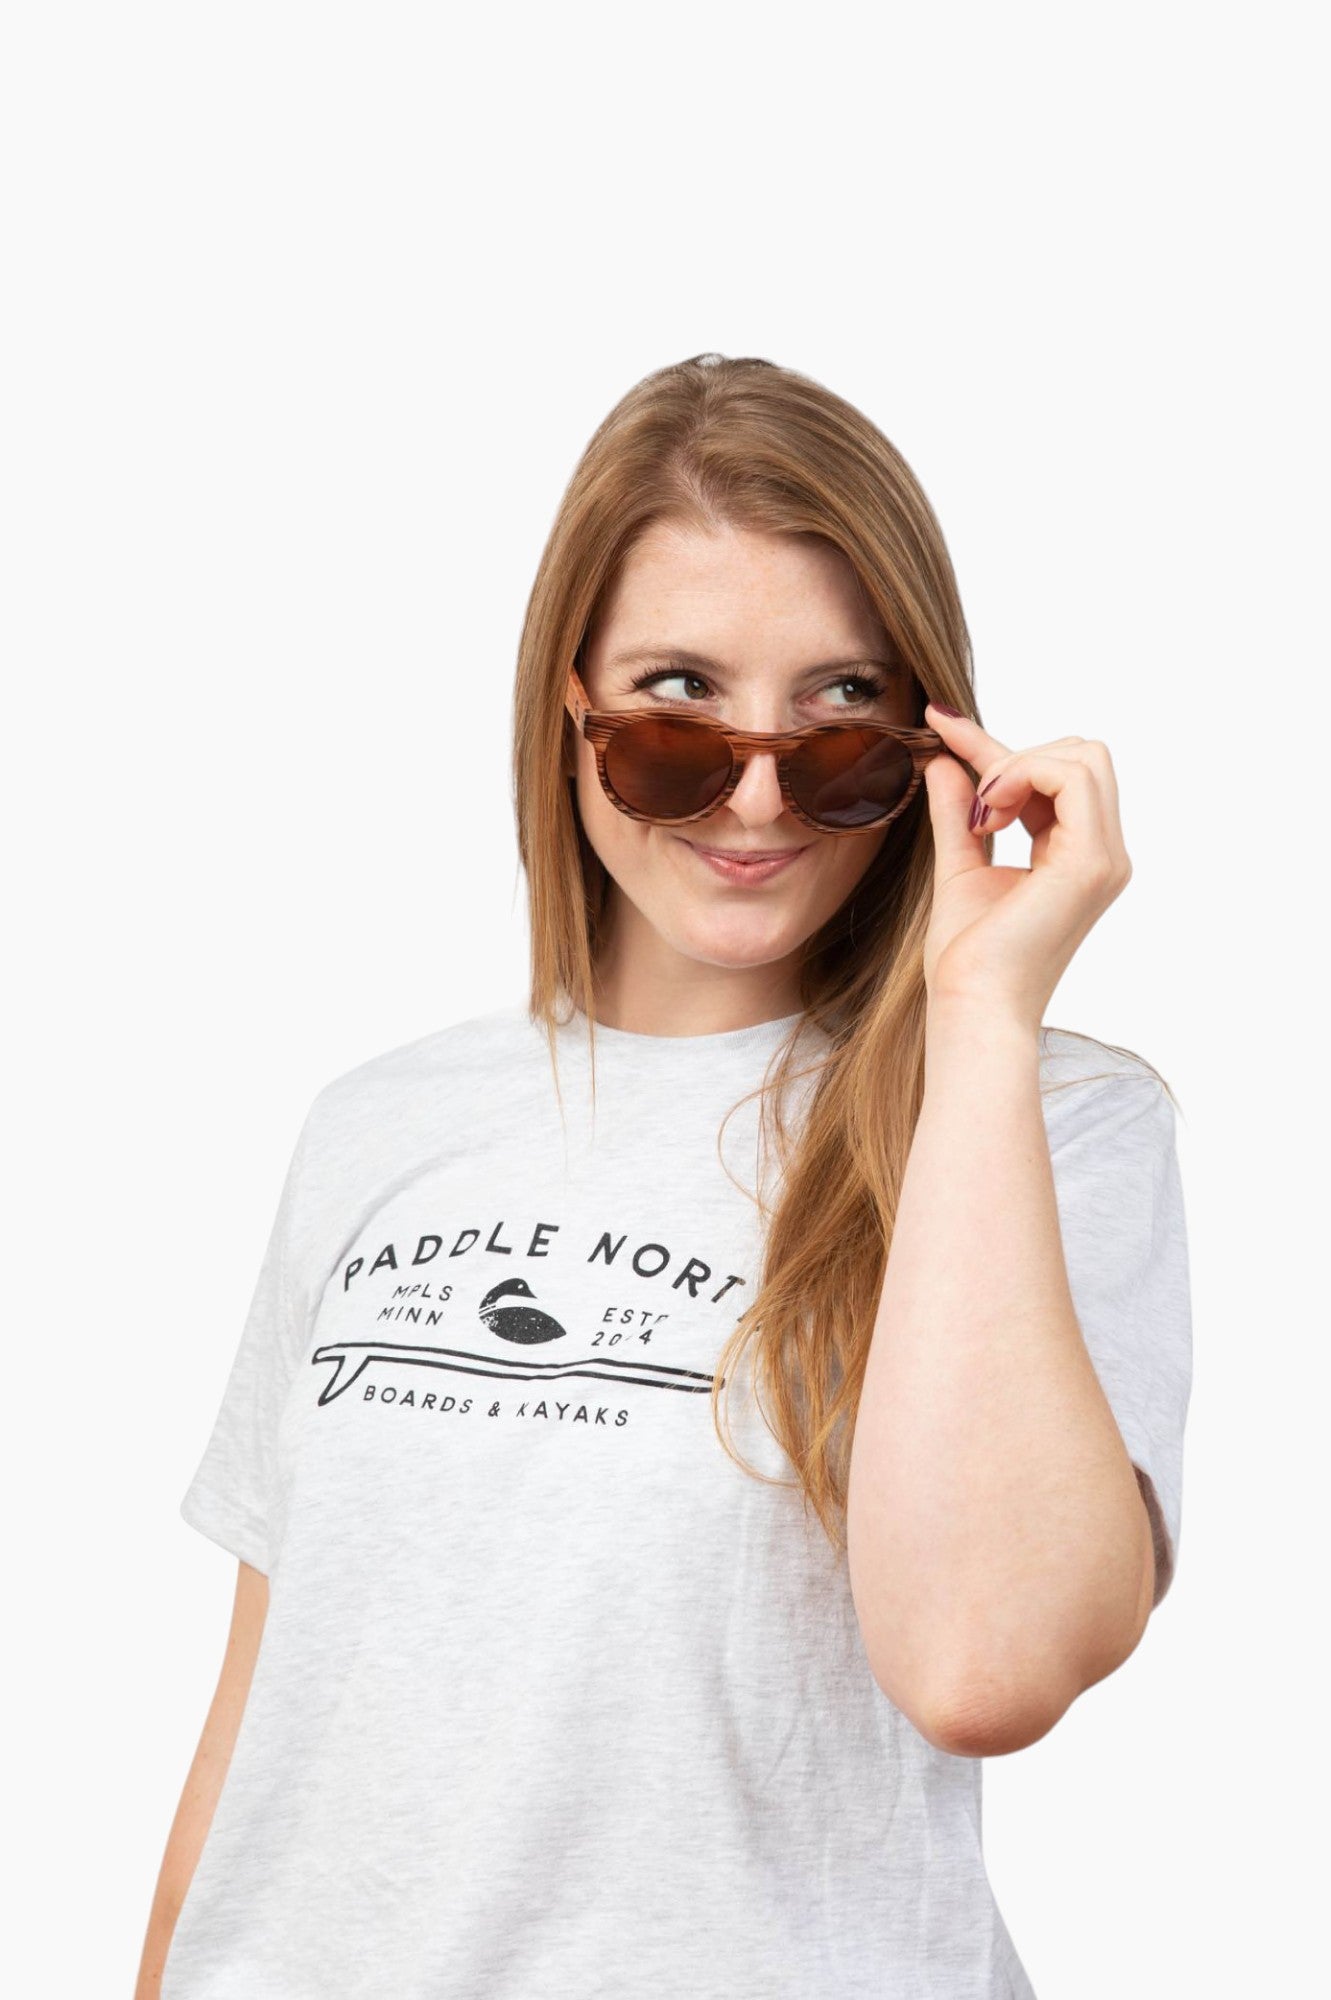 Woman wearing round, wood-looking framed sunglasses wearing a paddle north t-shirt.